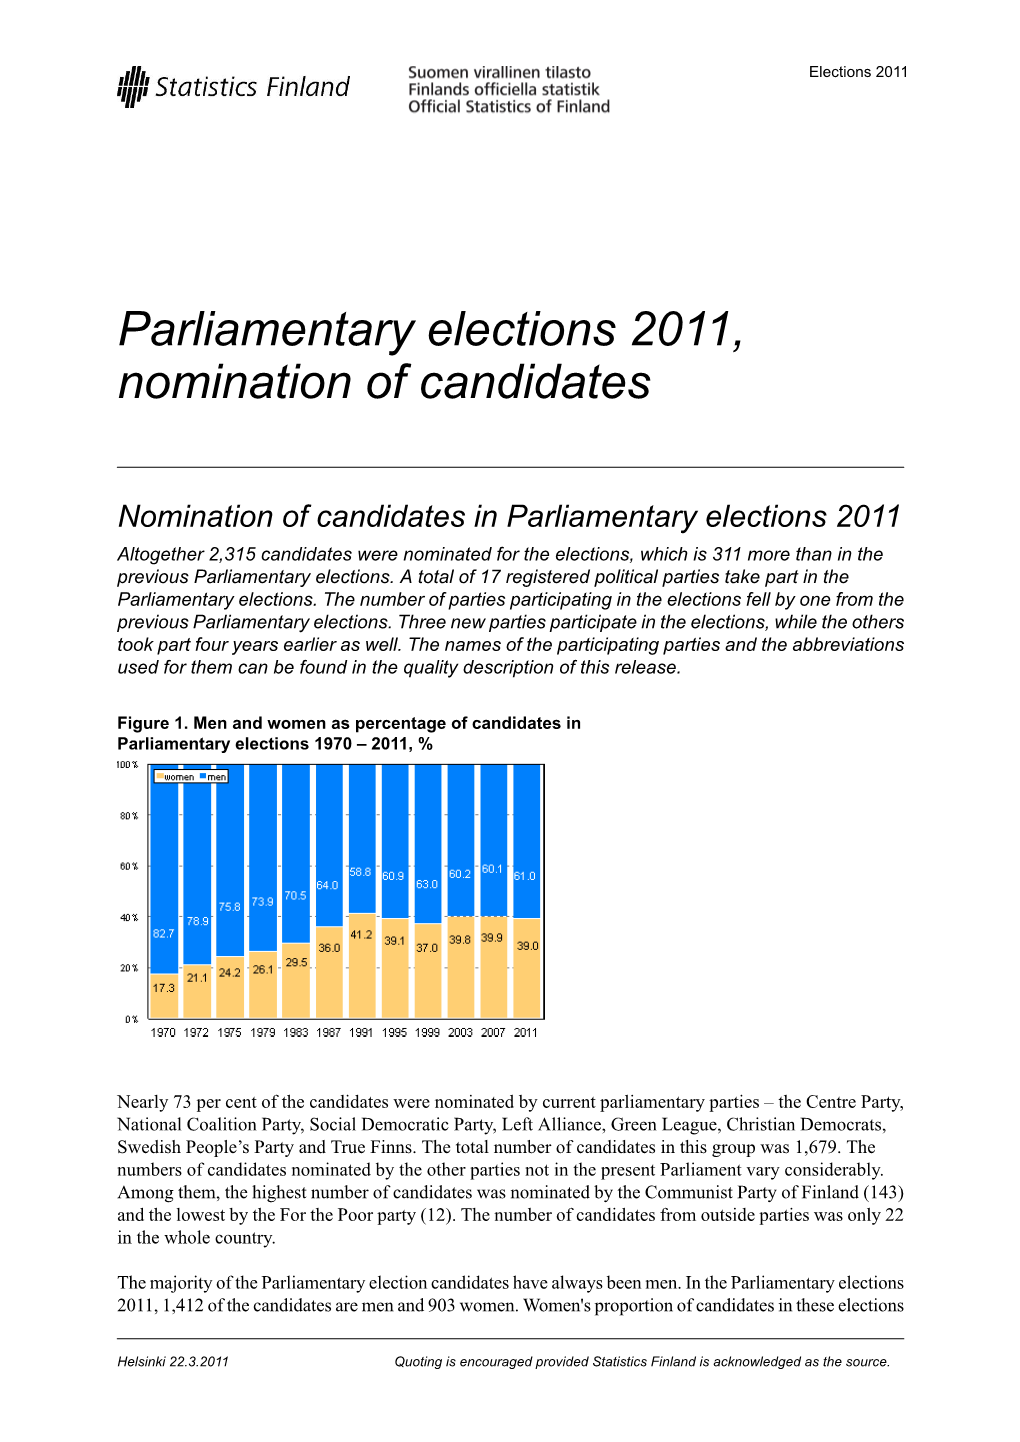 Parliamentary Elections 2011, Nomination of Candidates